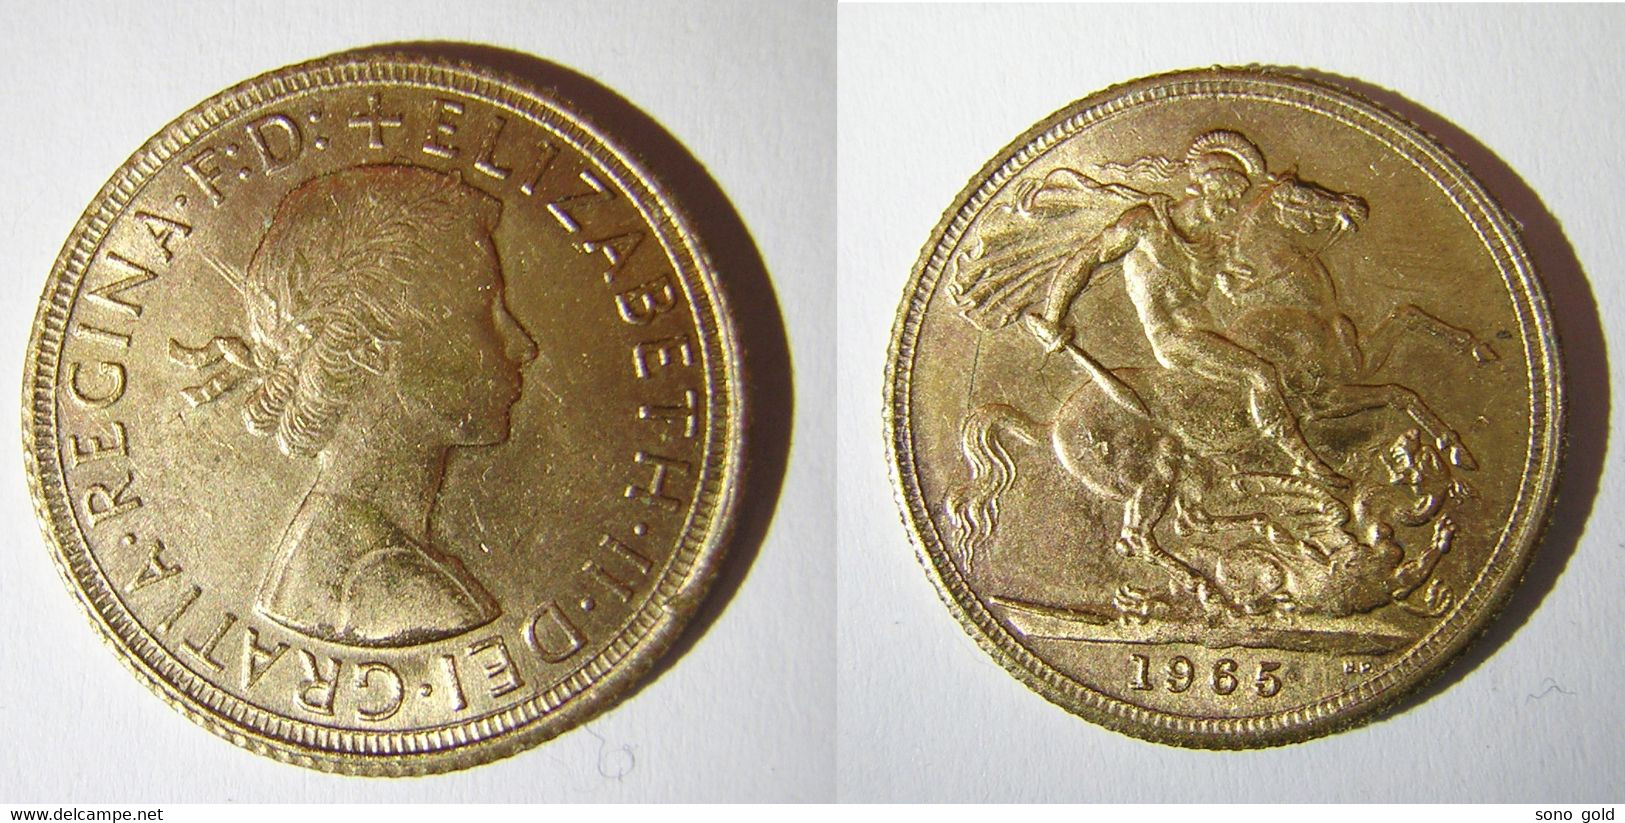 VERY NICE 1965 Sovereign Gold Sterling FAKE - To Identify